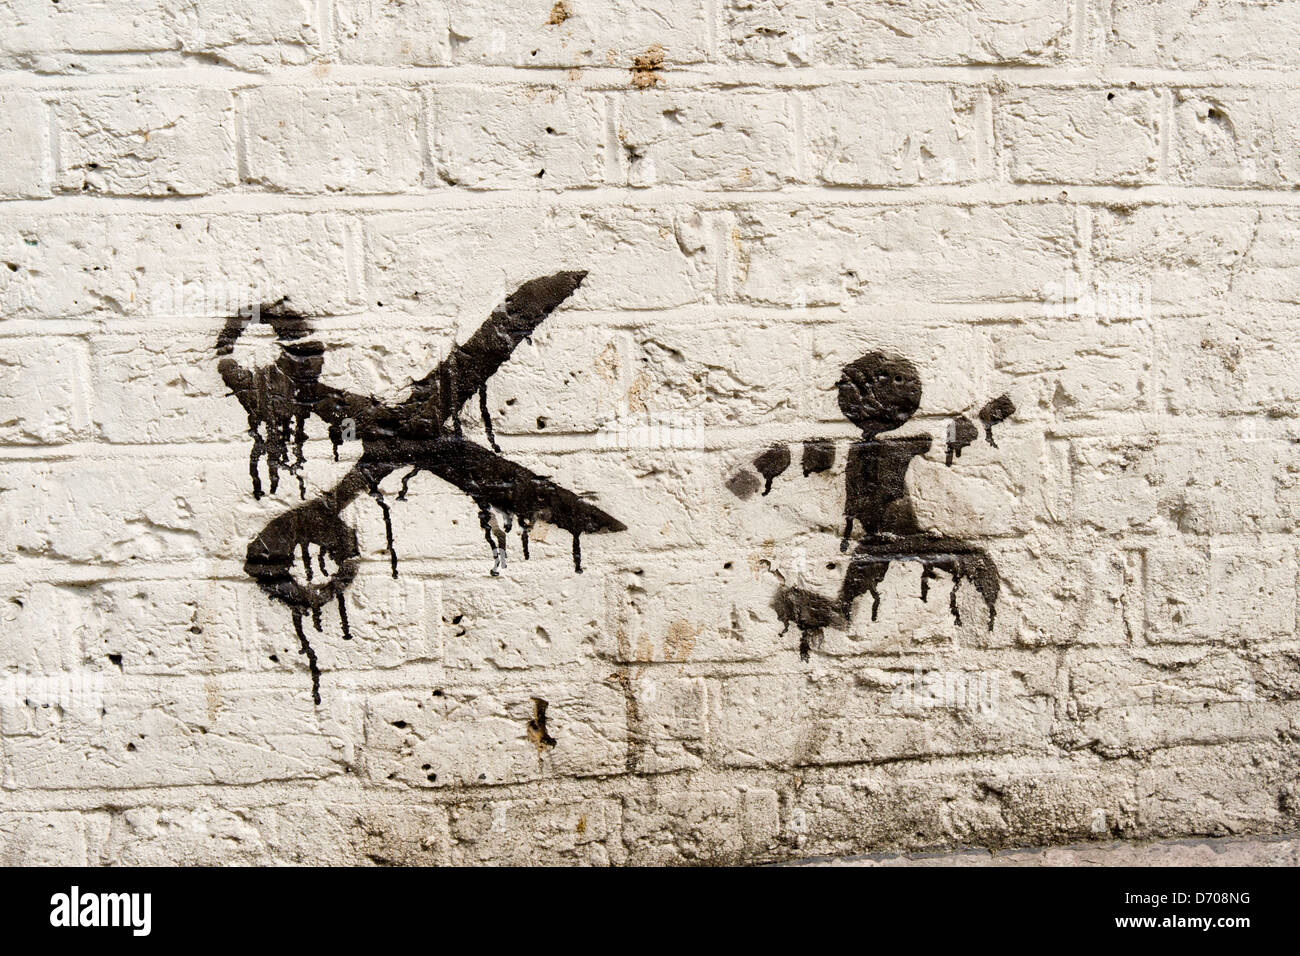 street art showing man being chased by scissors Stock Photo